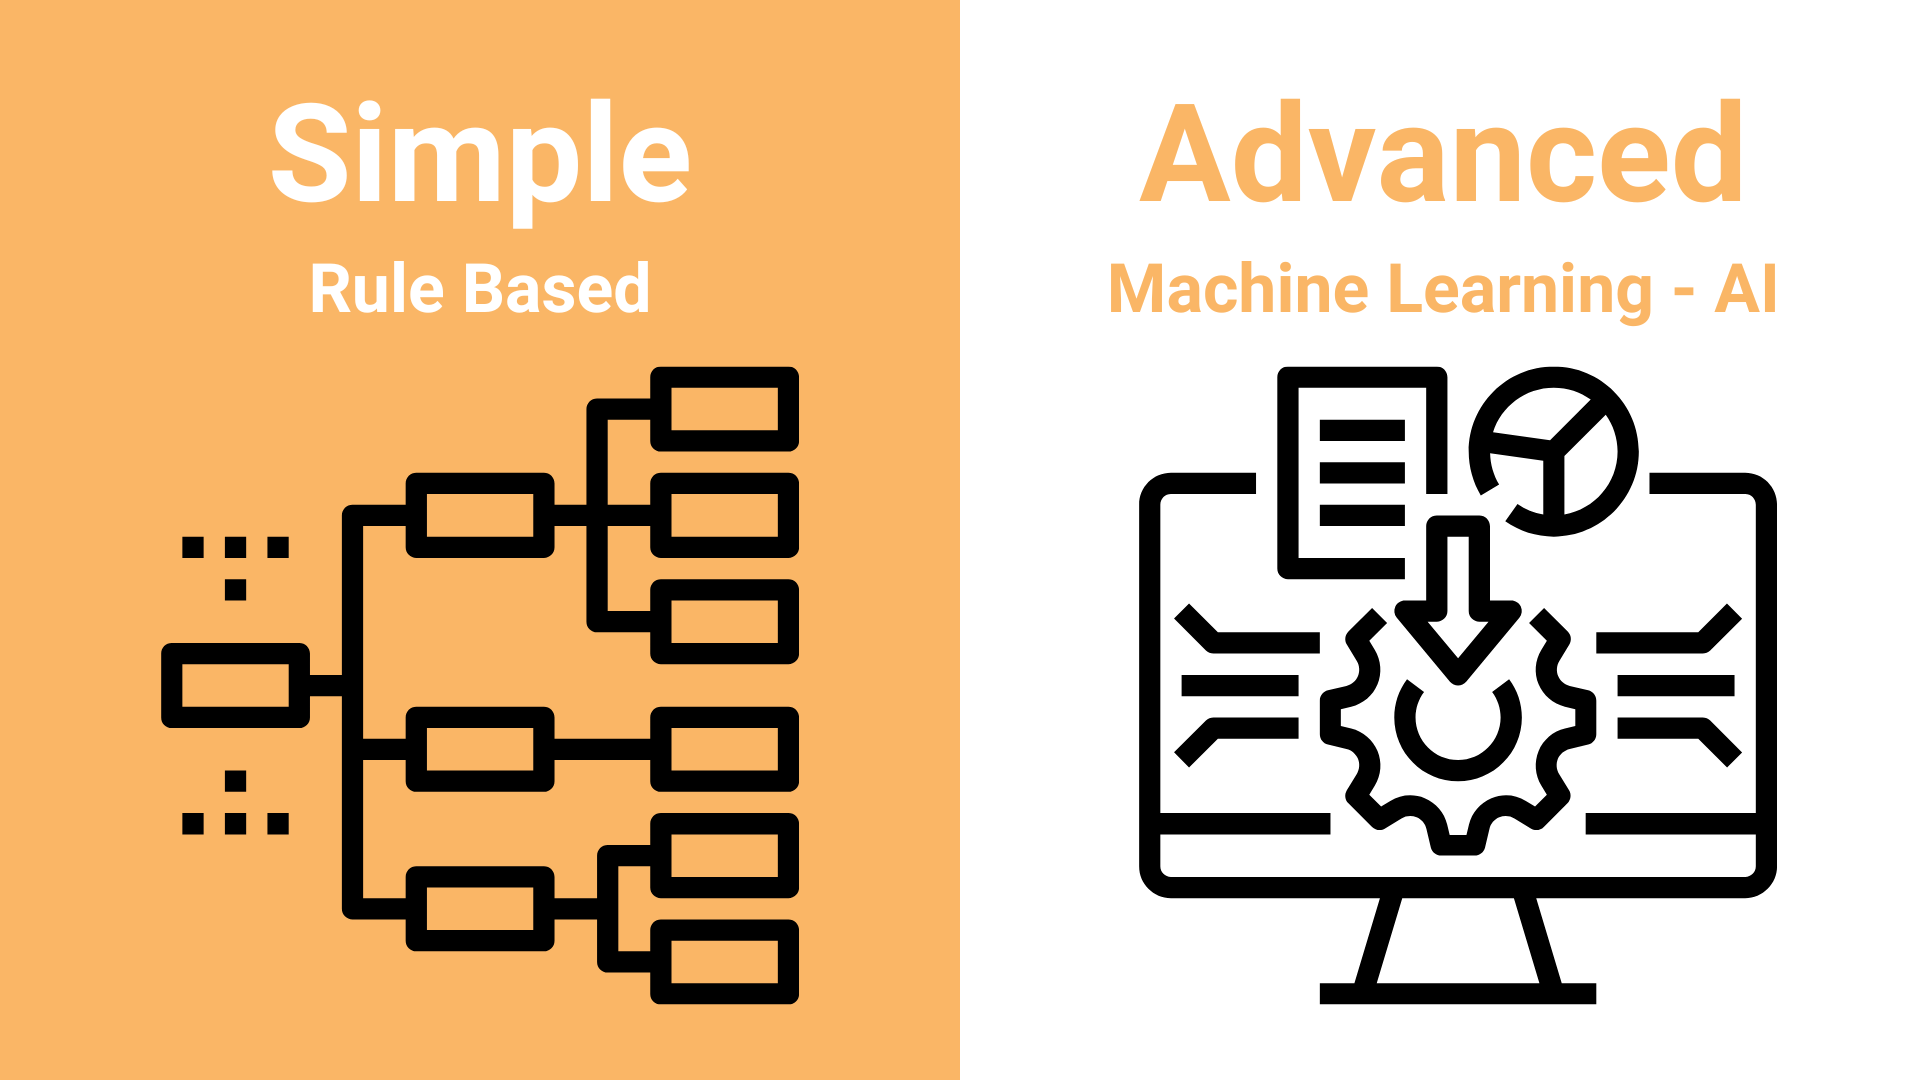 An illustration in two parts. The left side is titled Simple Rule Based, and has an illustration of a flow chart. The right side is titled Advanced Machine Learning AI, and has a picture of information flowing into a gear inside a computer.